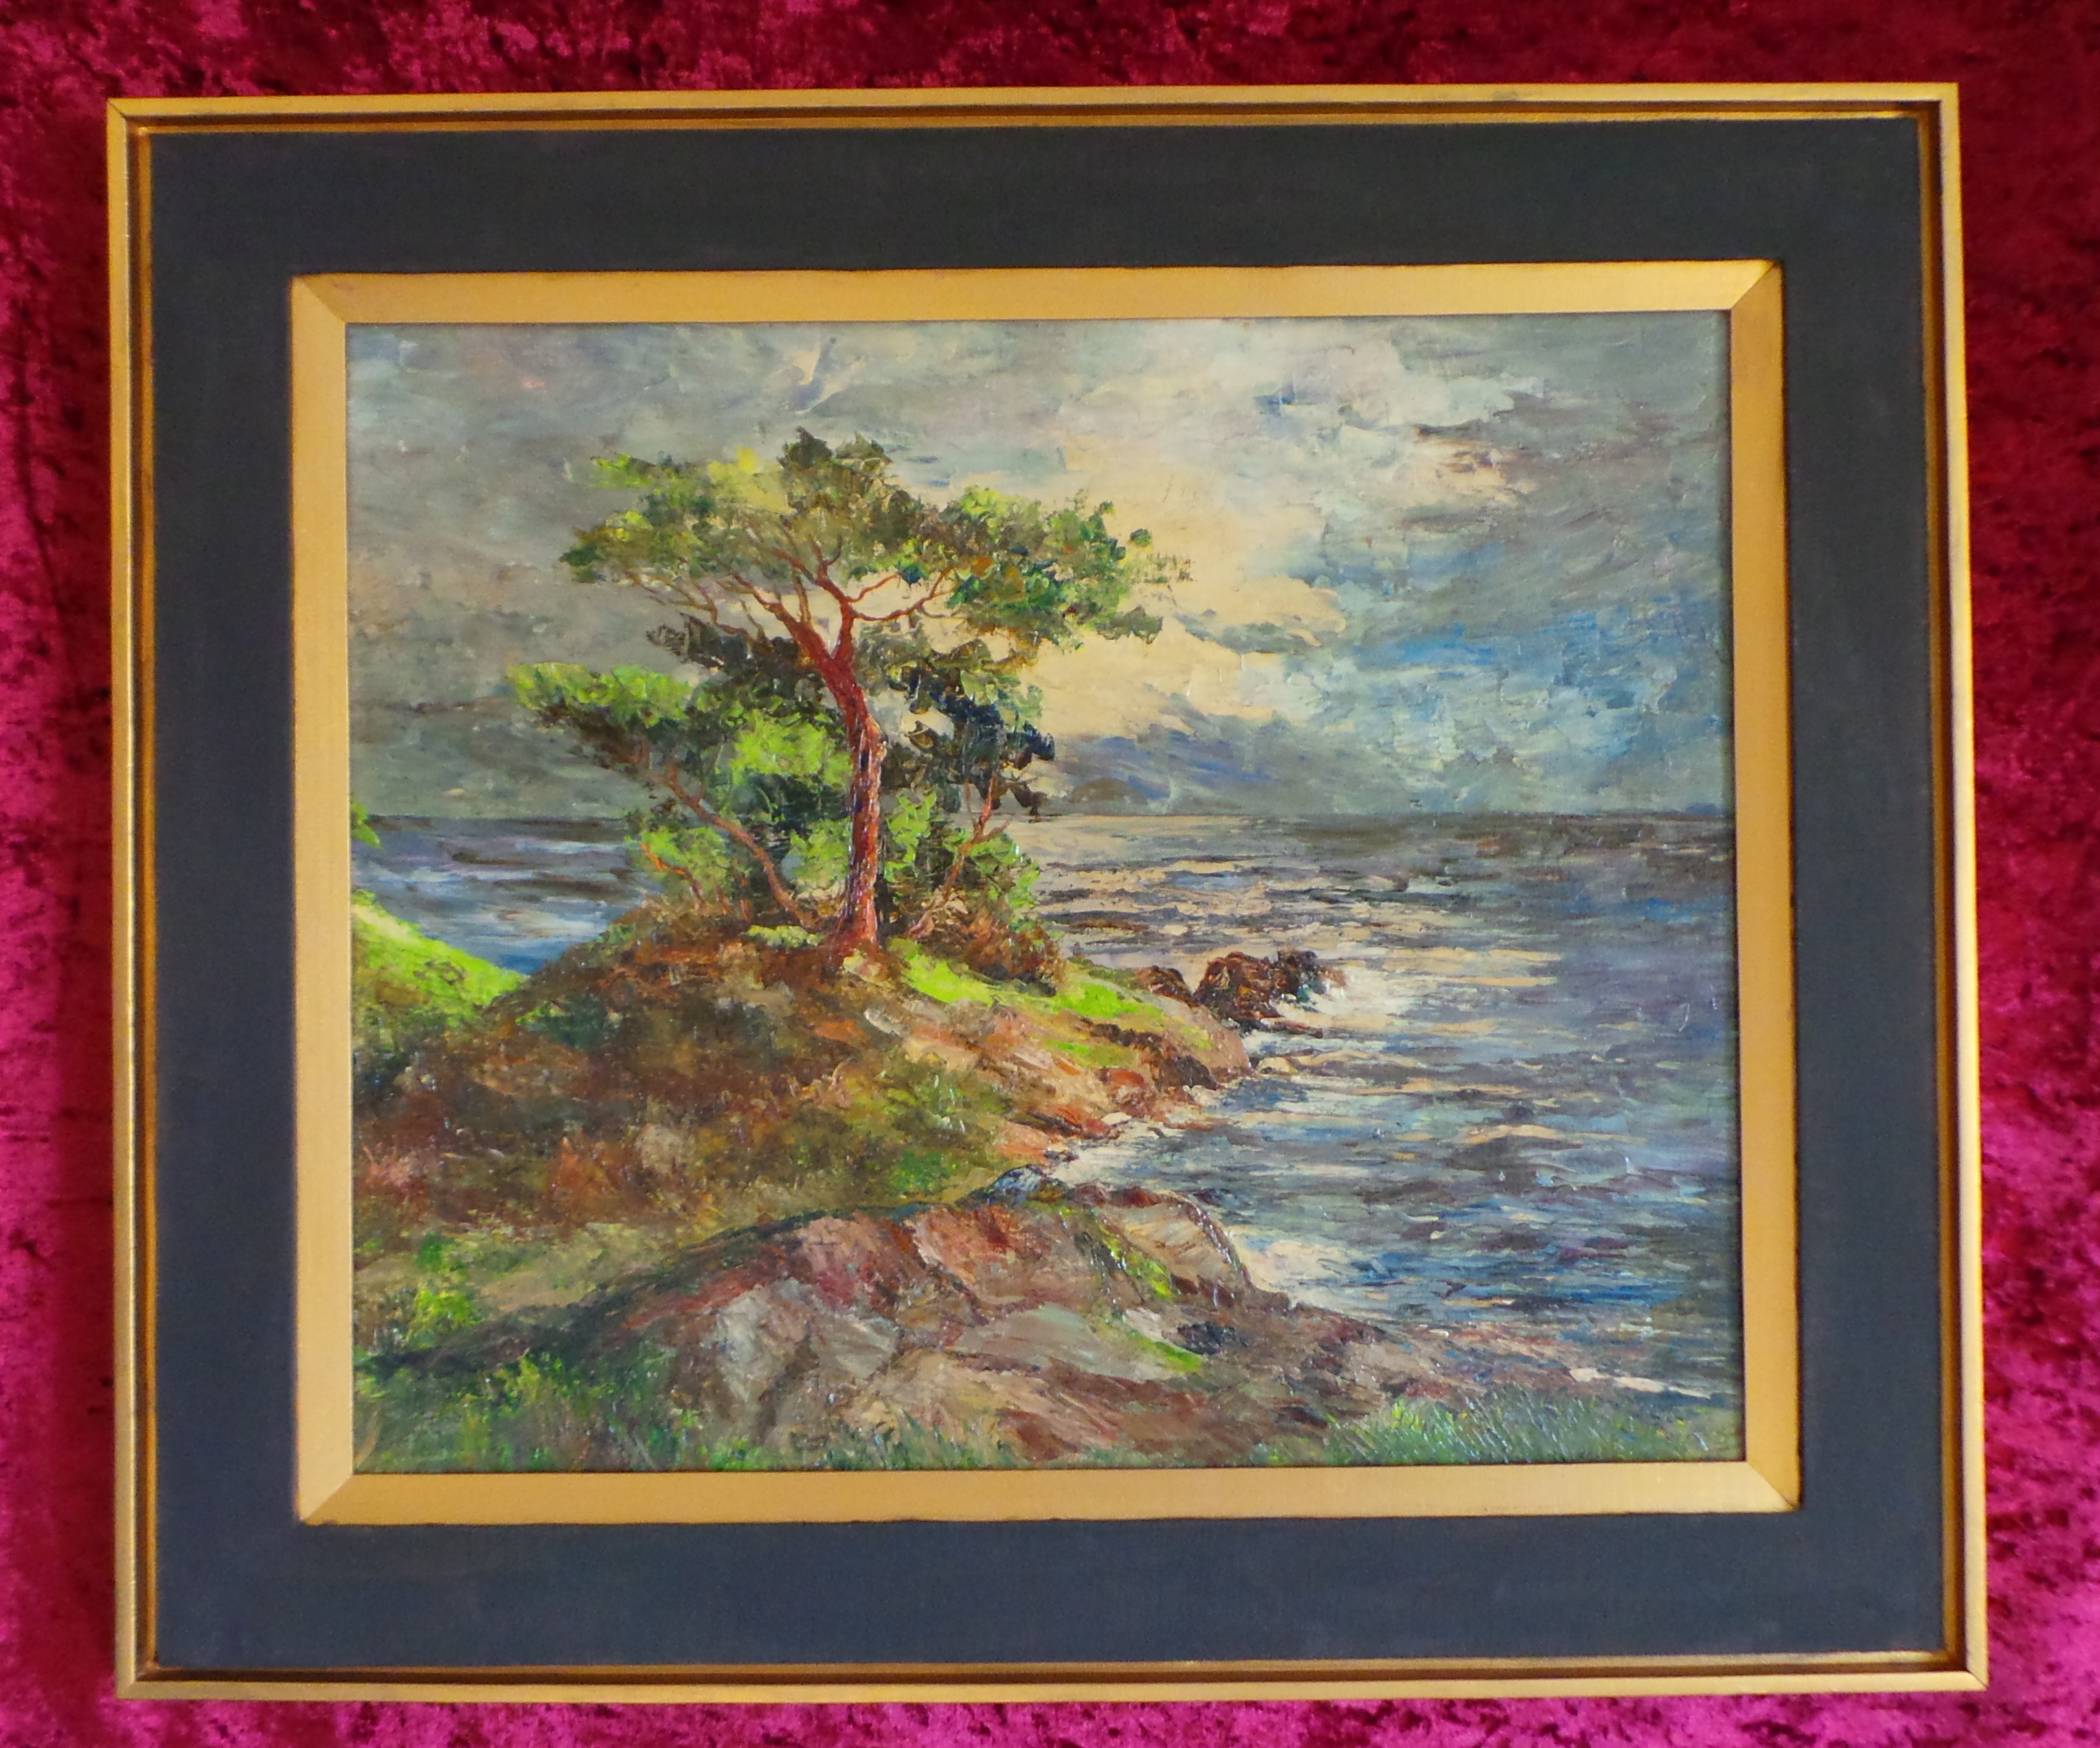 SEASIDE IMPRESSION AT A SUNSET. AN OIL PAINTING ON BOARD. (1964)